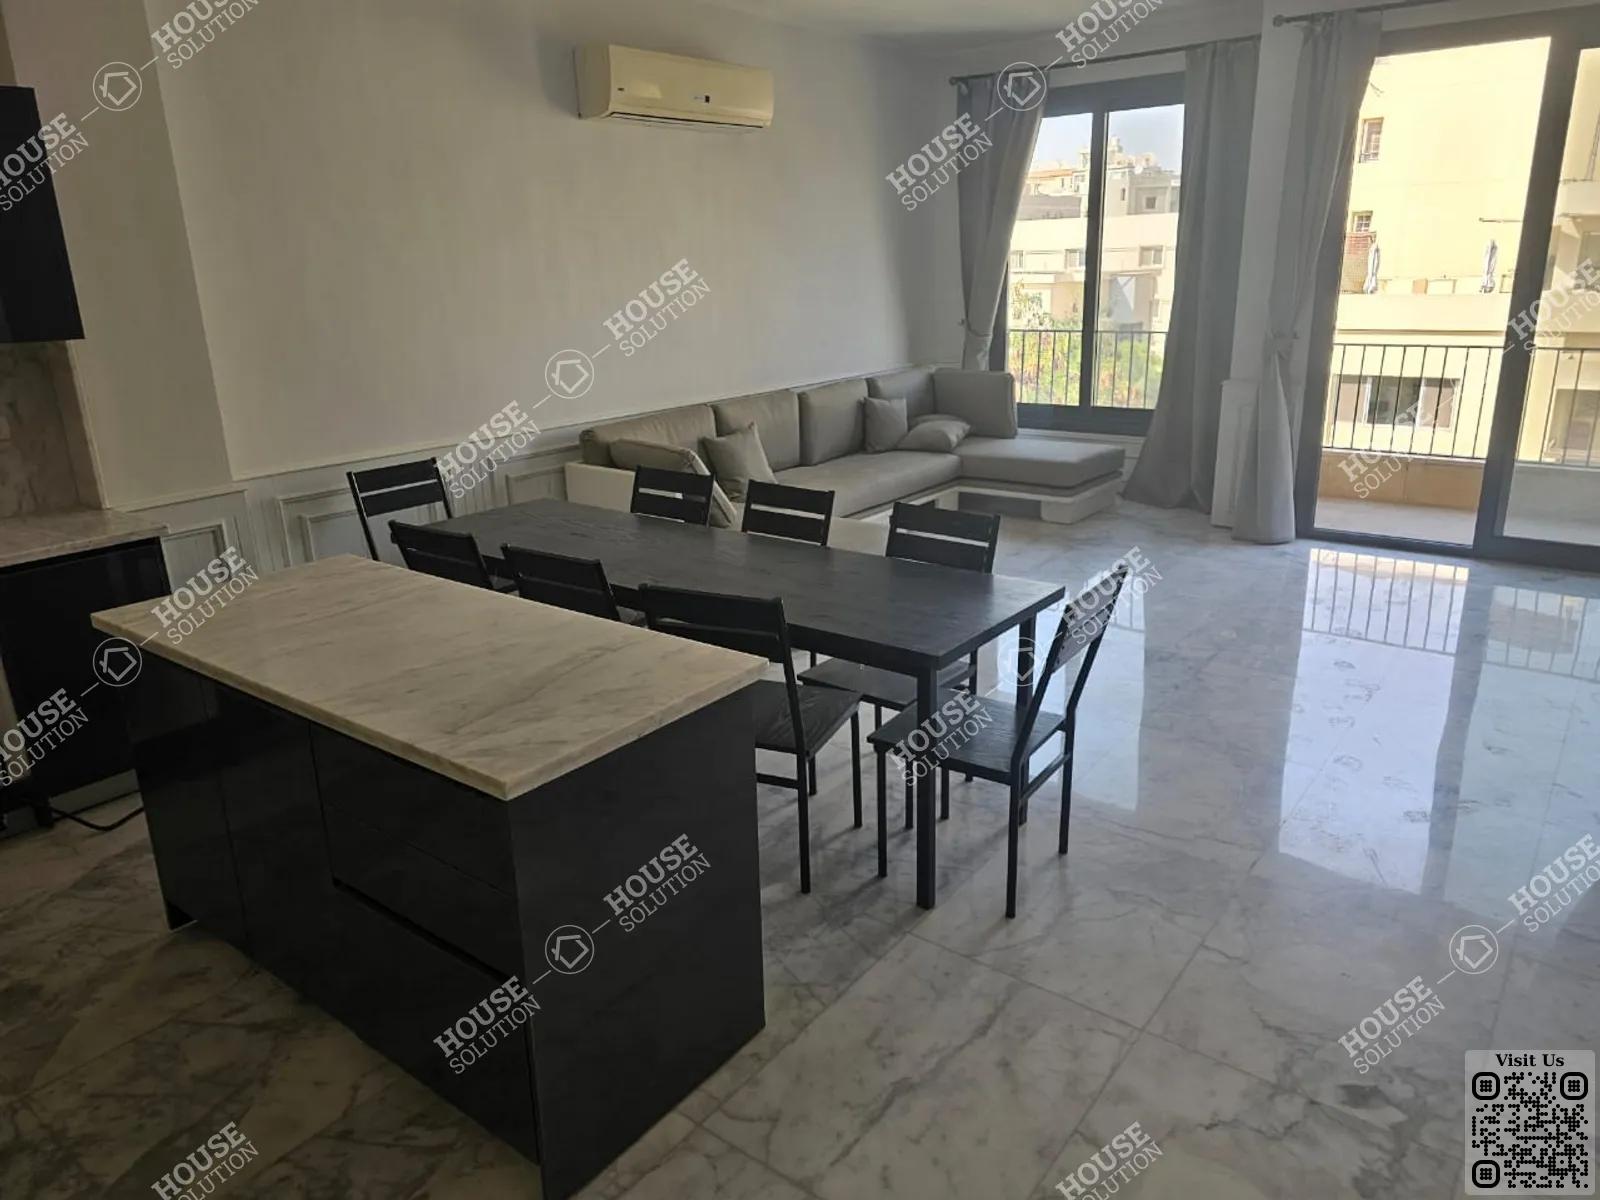 RECEPTION  @ Apartments For Rent In Maadi Maadi Sarayat Area: 165 m² consists of 3 Bedrooms 3 Bathrooms Modern furnished 5 stars #5915-0